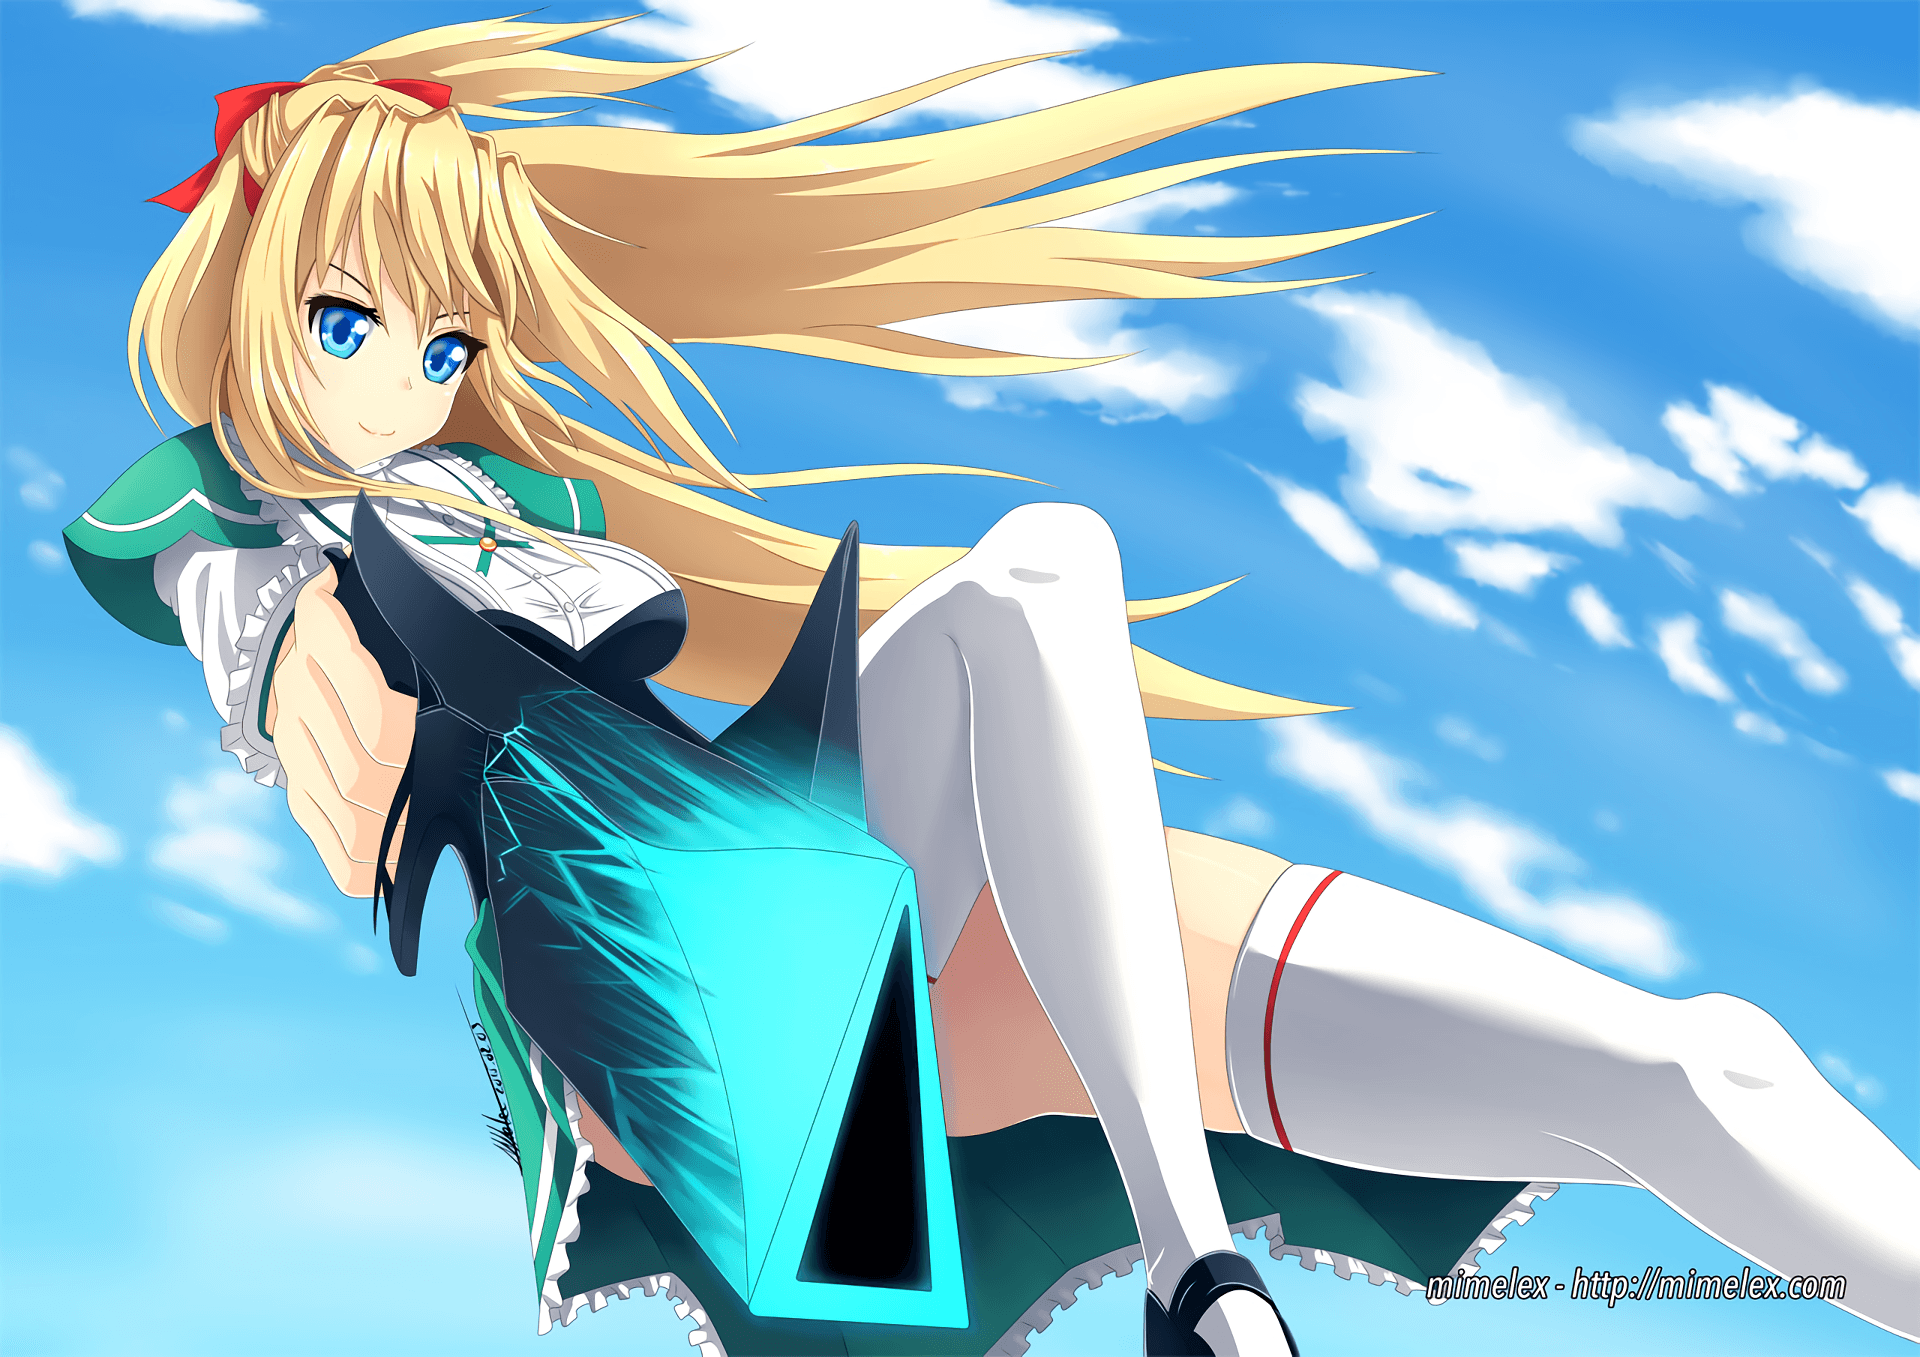 HD desktop wallpaper: Anime, Julie Sigtuna, Absolute Duo download free  picture #1269291